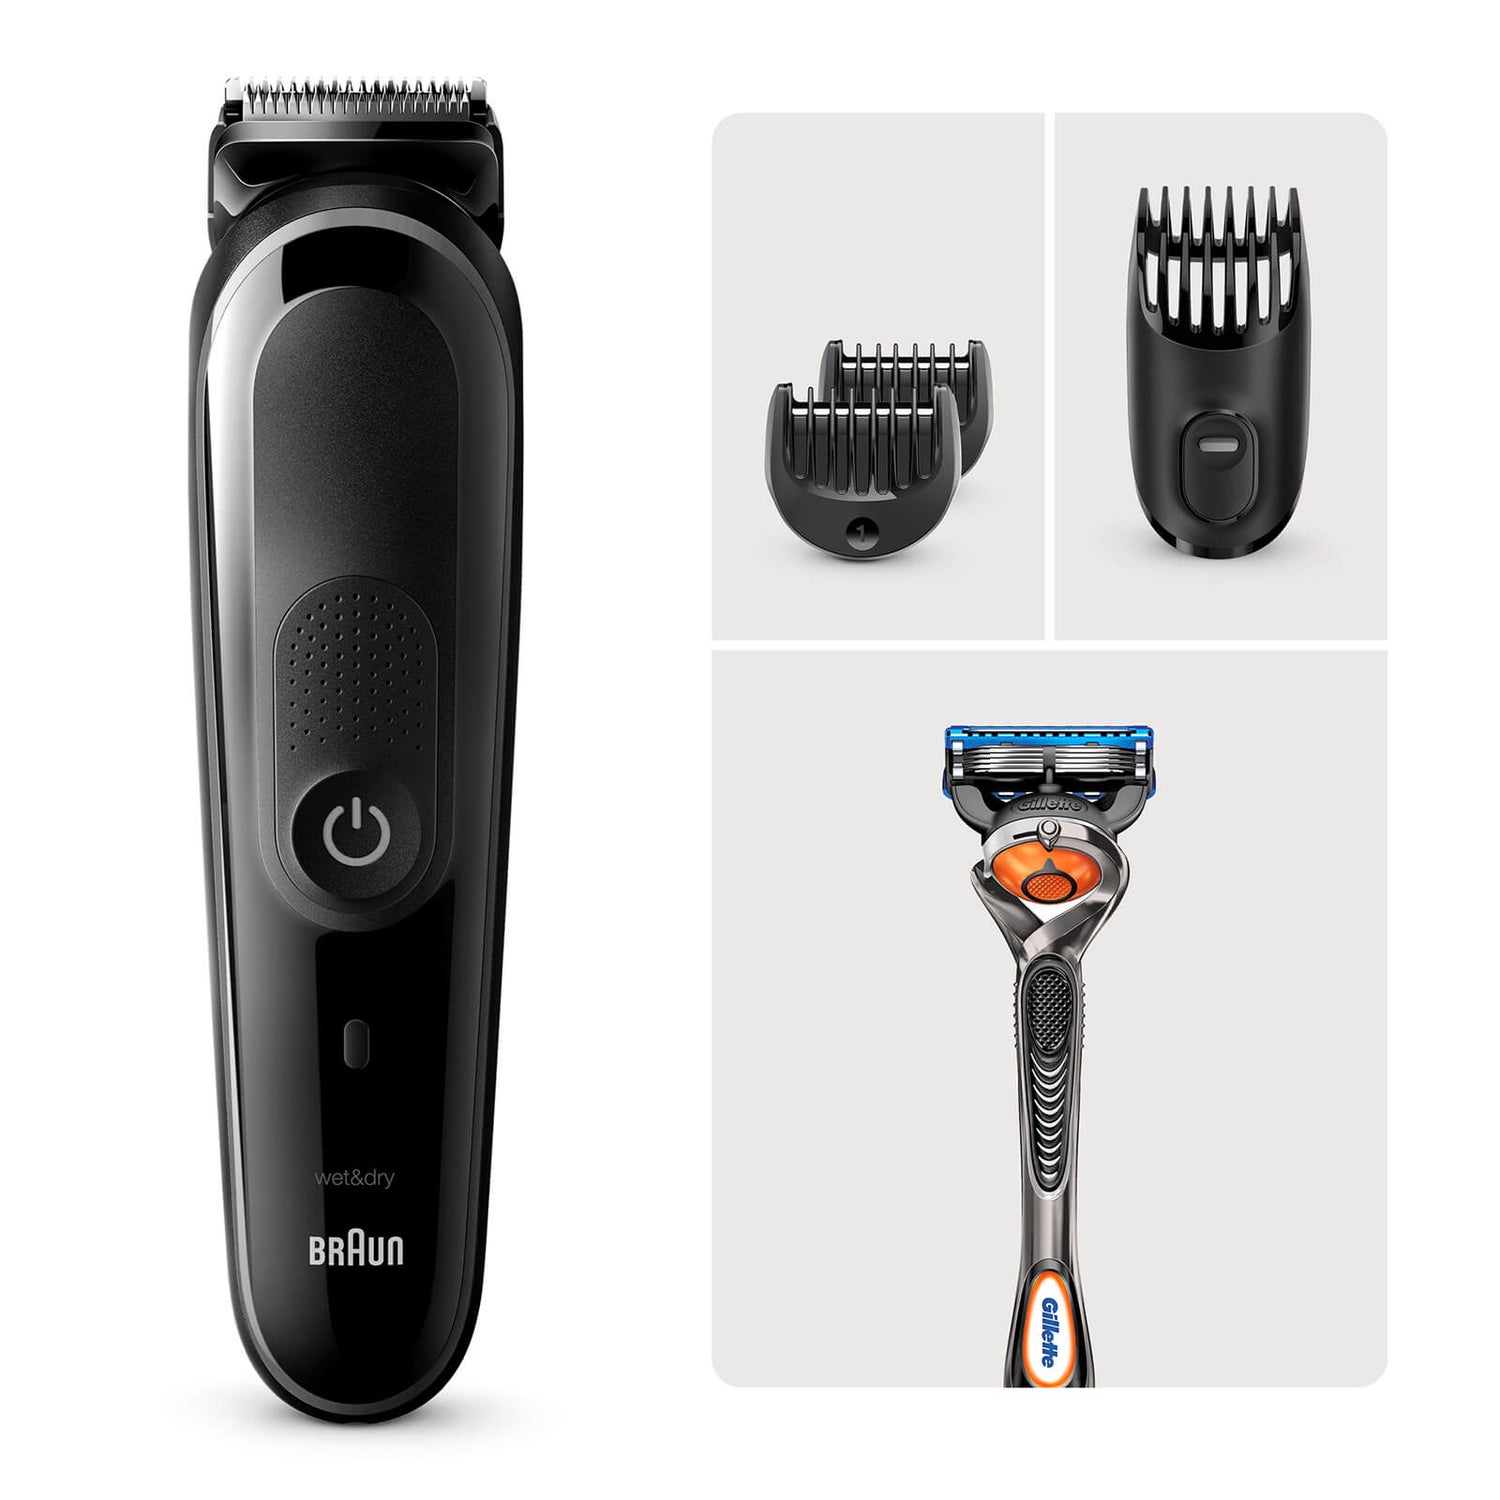 Braun 4-in-1 Styling Kit with Gillette Razor